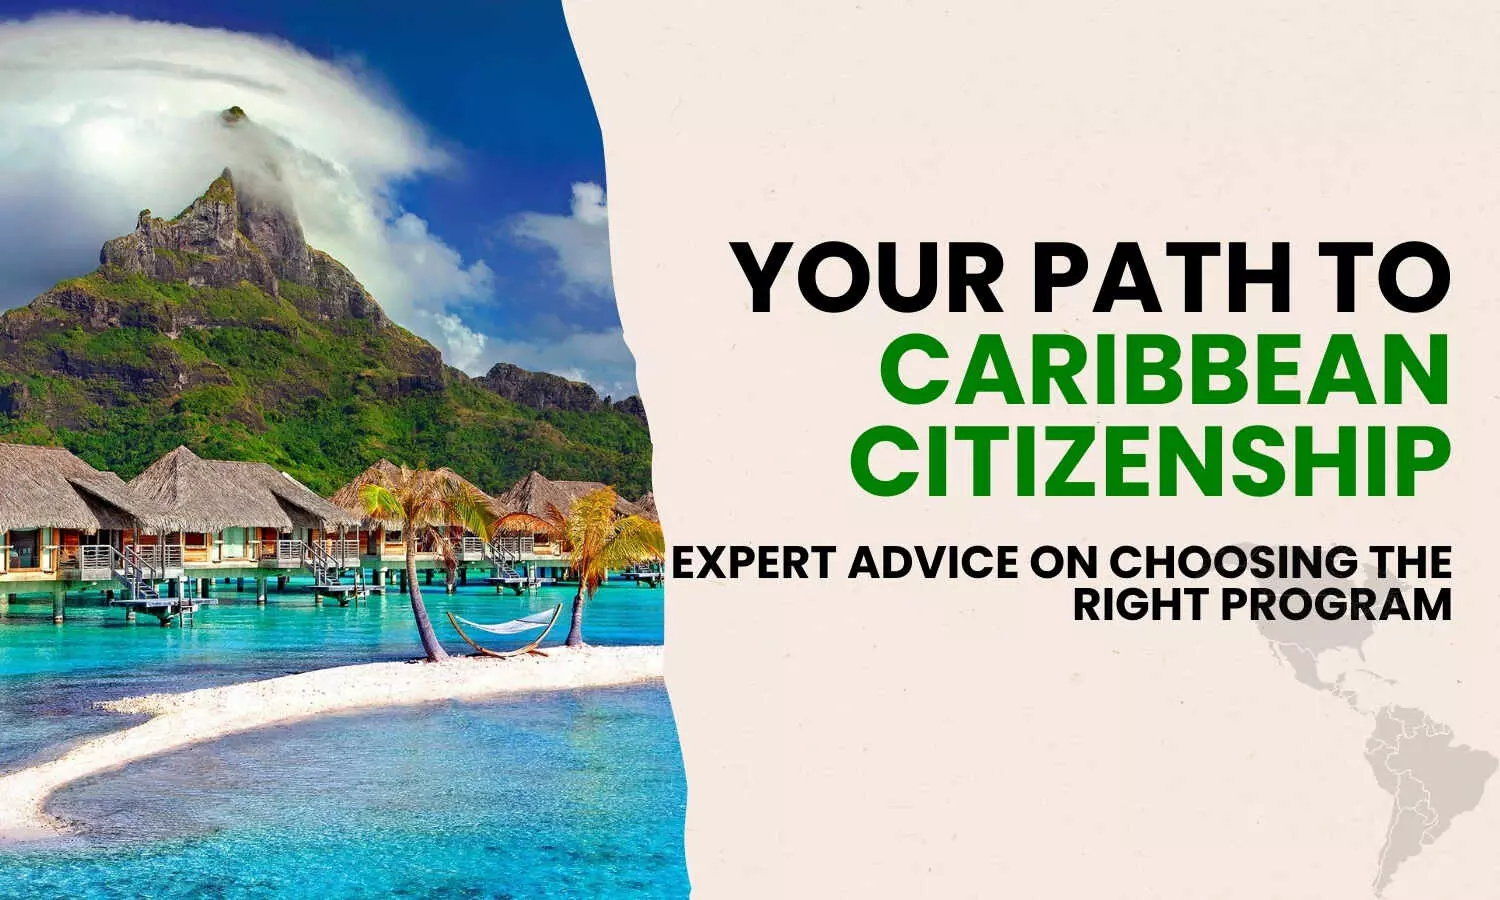 Your Path to Caribbean Citizenship: Expert Advice on Choosing the Right Program